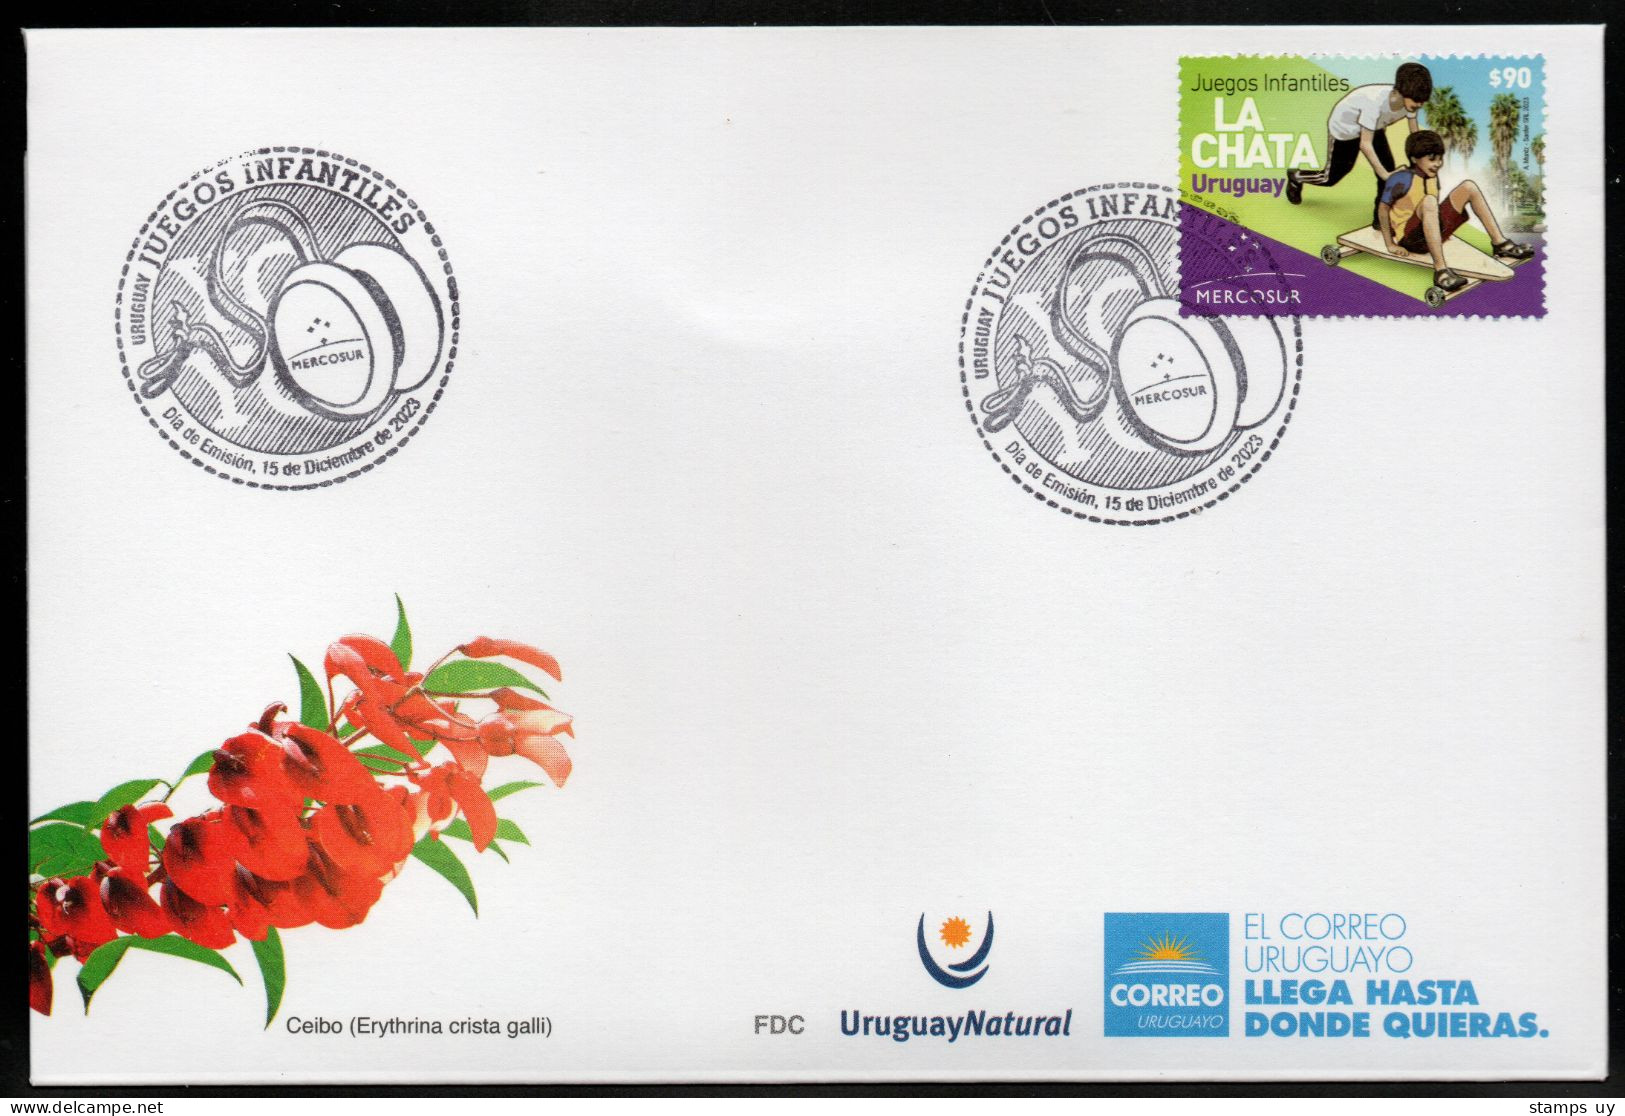 URUGUAY 2023 (Joint Issue, Mercosur, Games, Children, Toys, Wooden Cart, YoYo, Ruleman, Palm, Tree, Crux, Stars) - 1 FDC - Non Classés